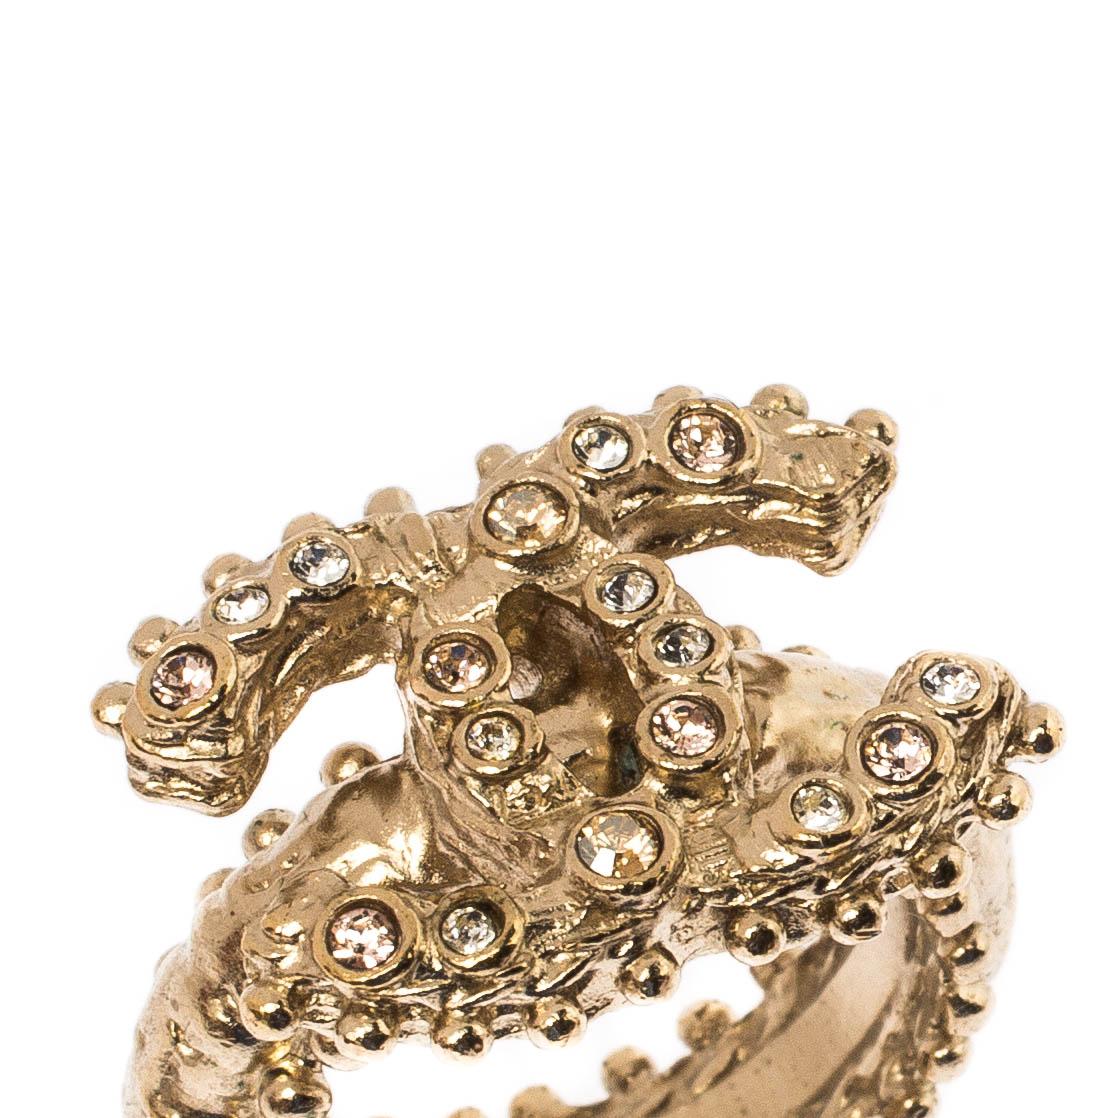 This exquisite ring by Chanel will make a timeless addition to your collection. Crafted from gold-tone metal, this gorgeous ring features the signature CC logo at the centre, detailed with crystals and the ring is given a textured finish. This